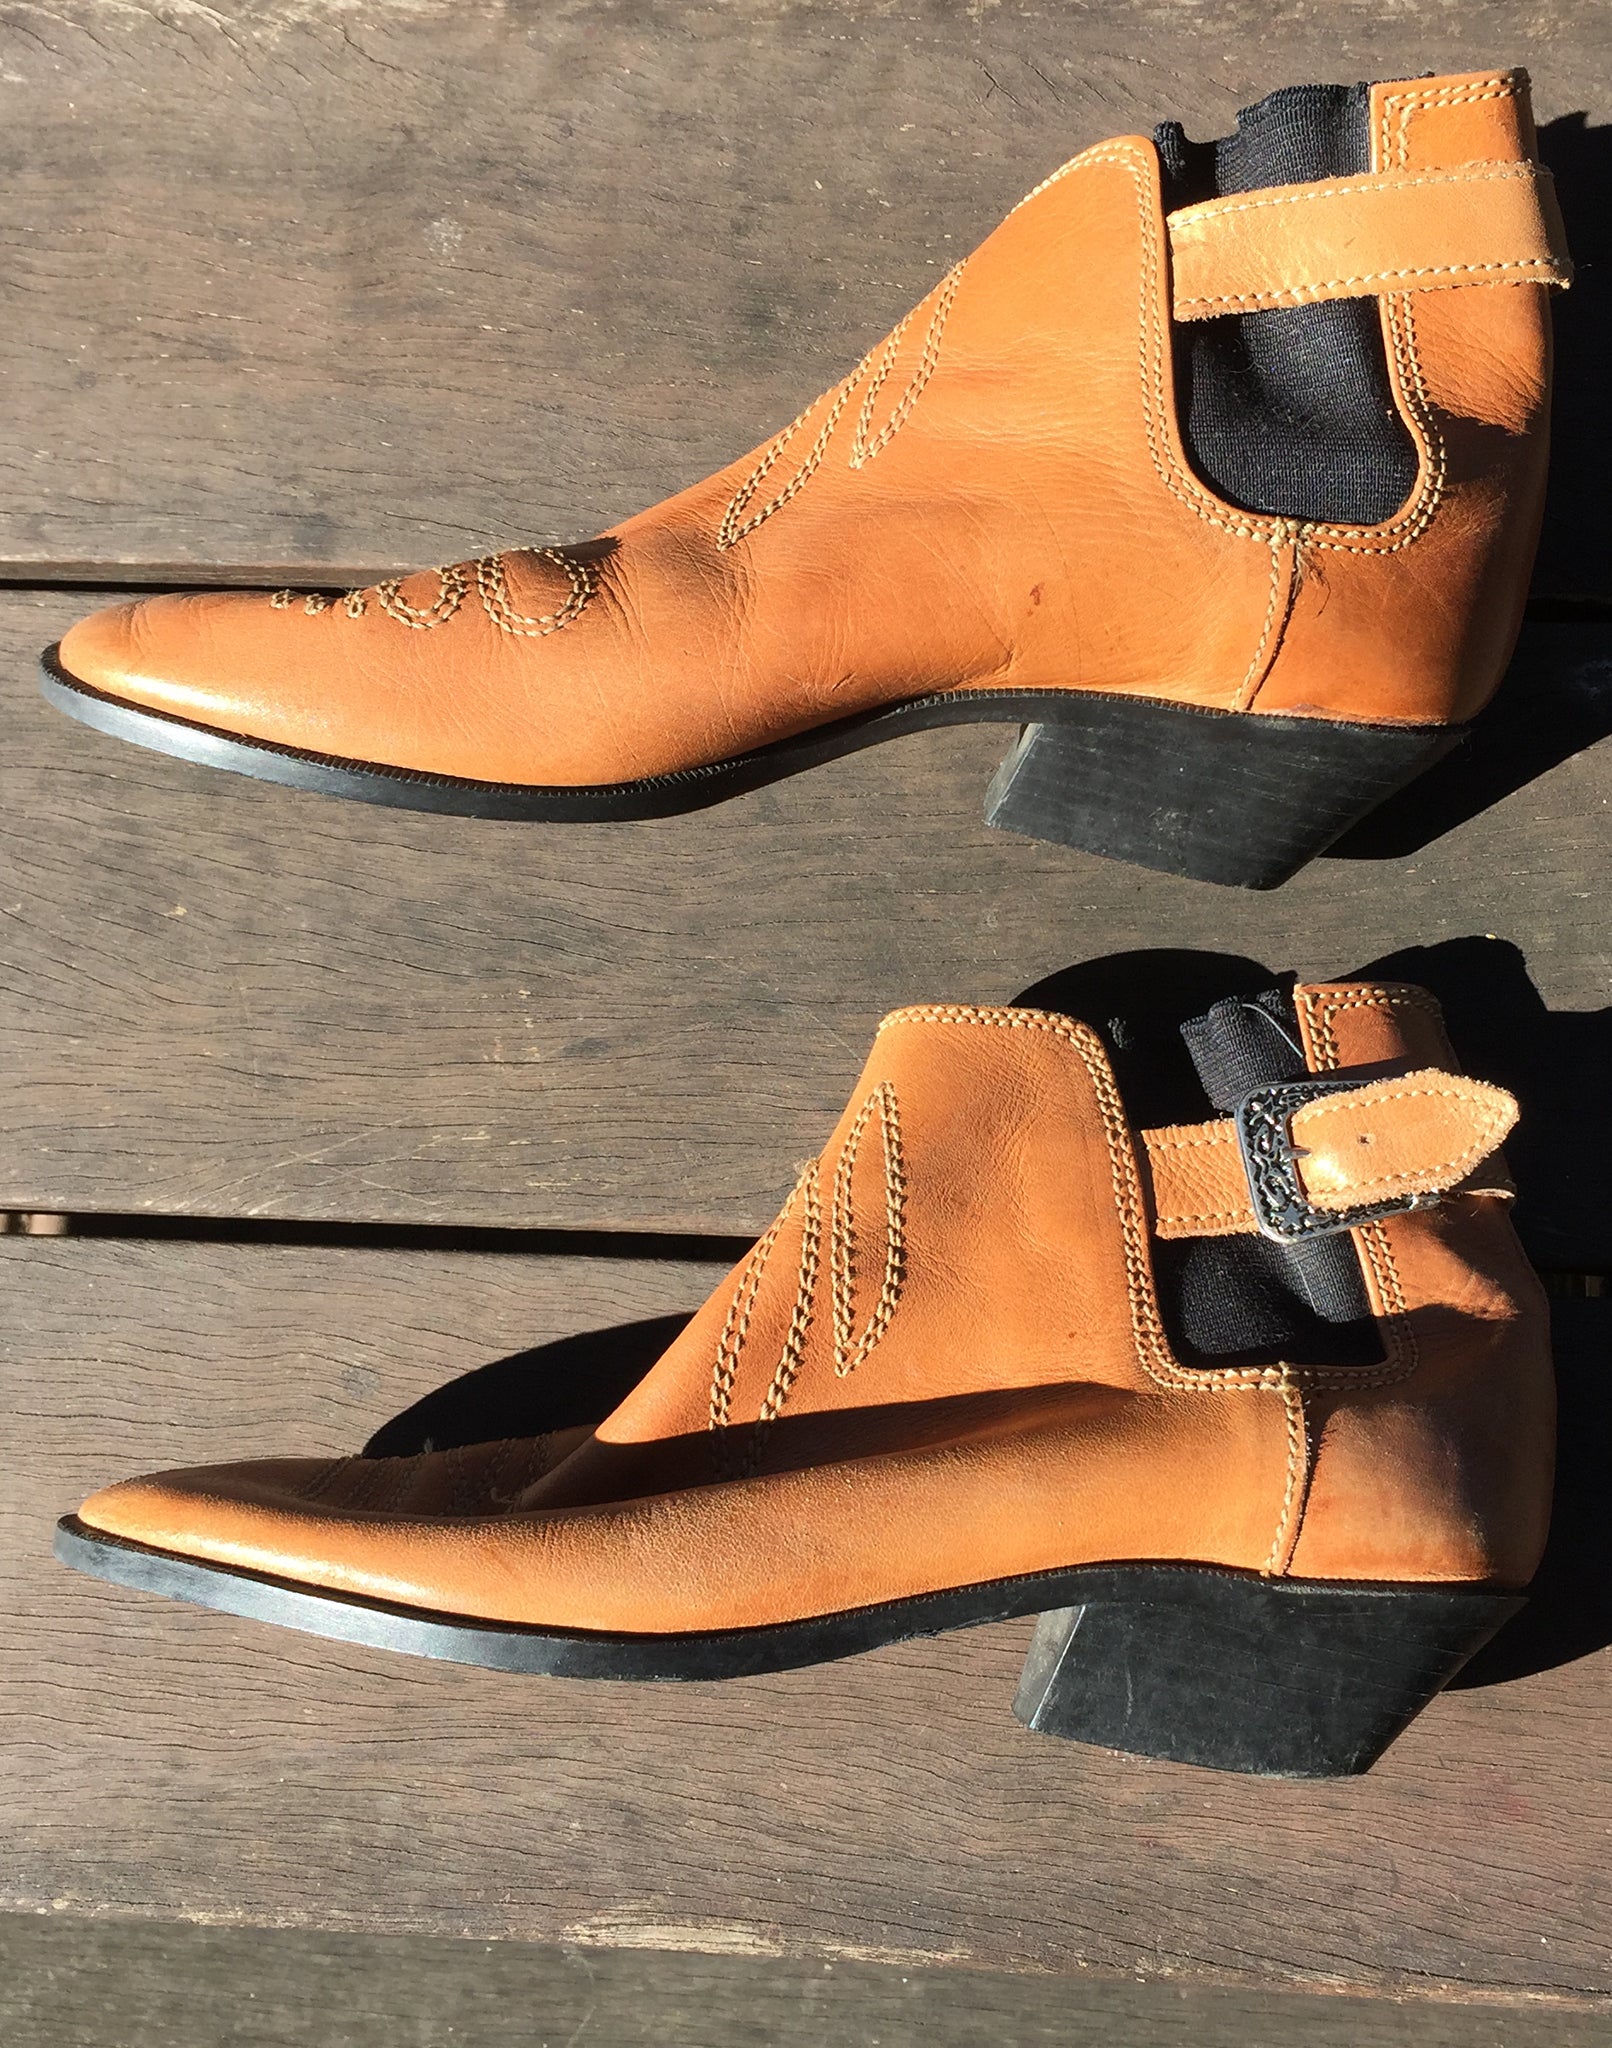 Vintage 90's Tan Mustard Ankle Boots - Size 37